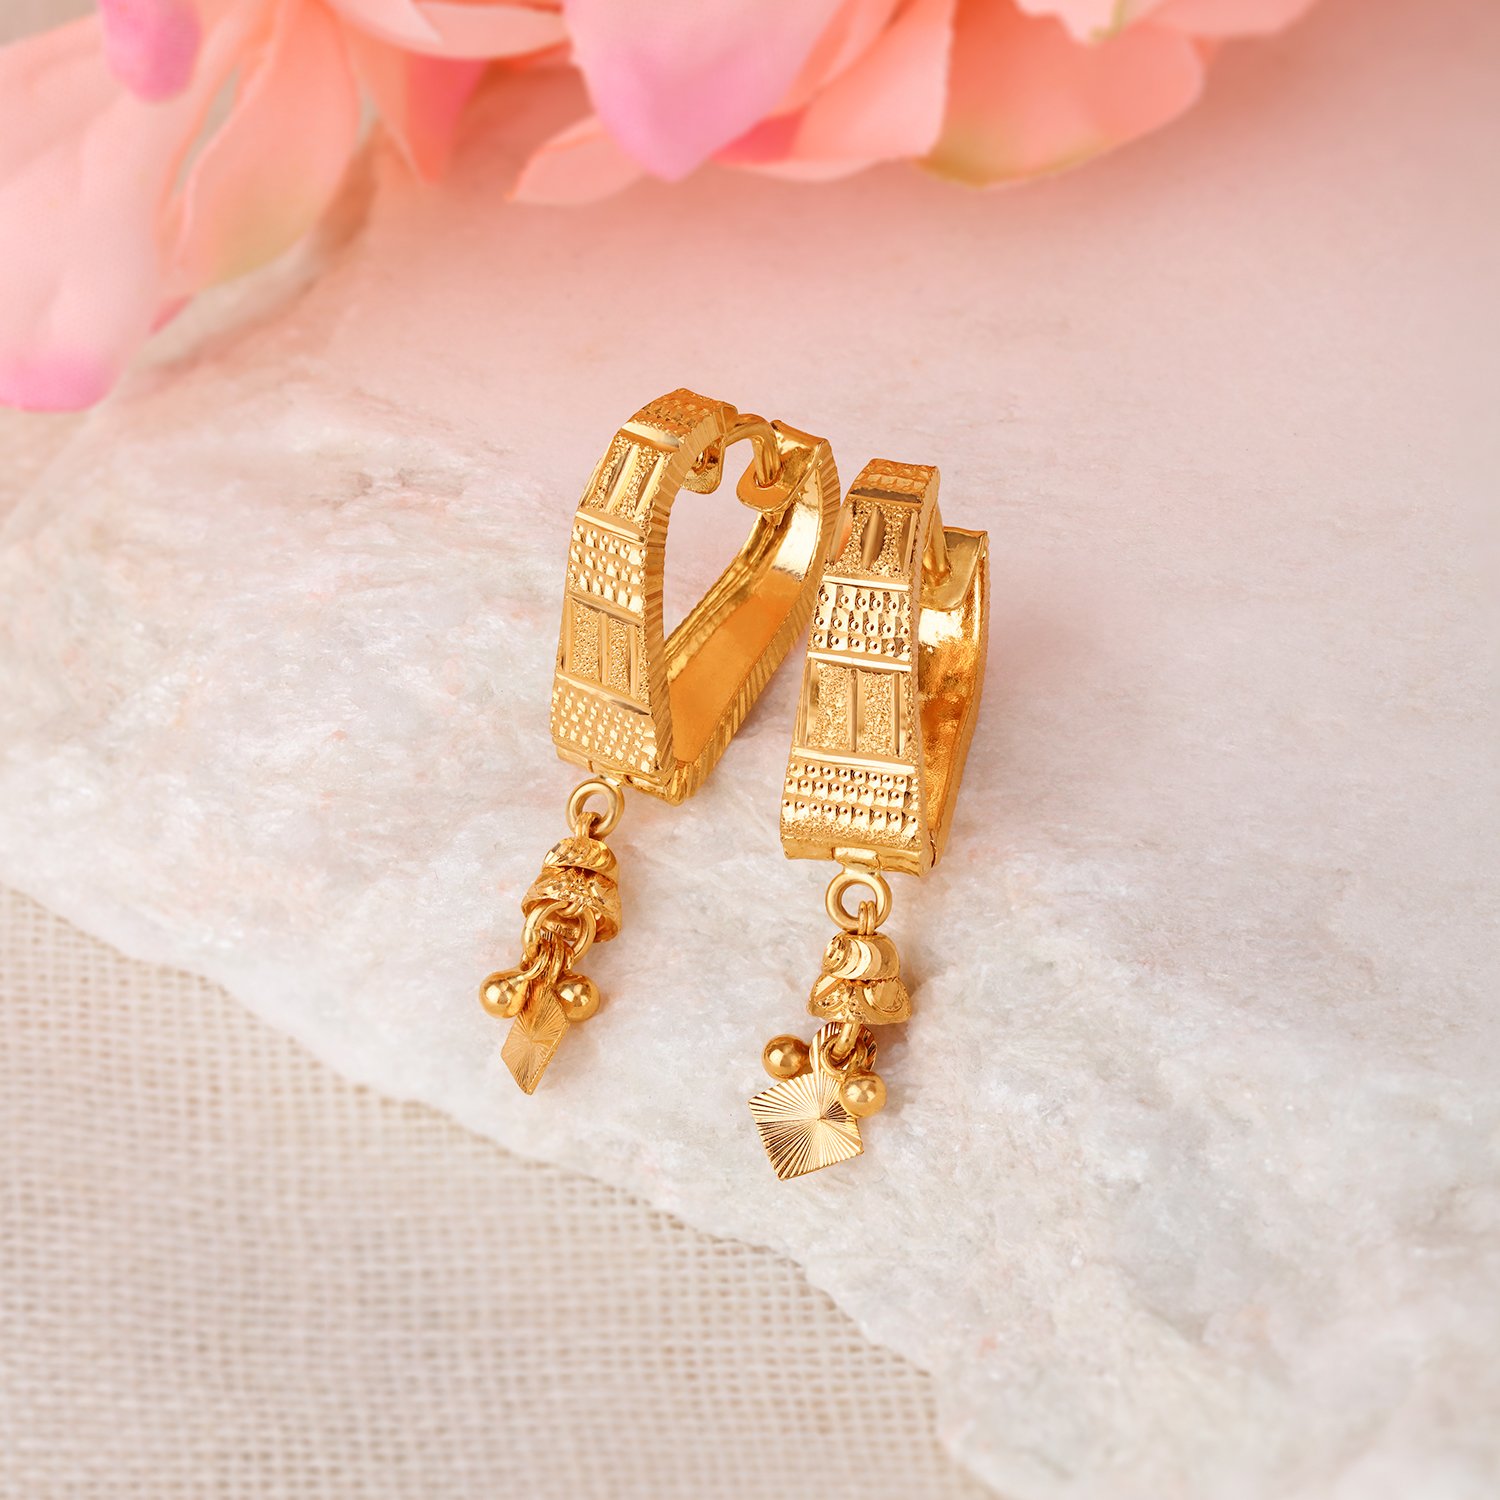 Discover more than 212 gold bali earrings designs latest